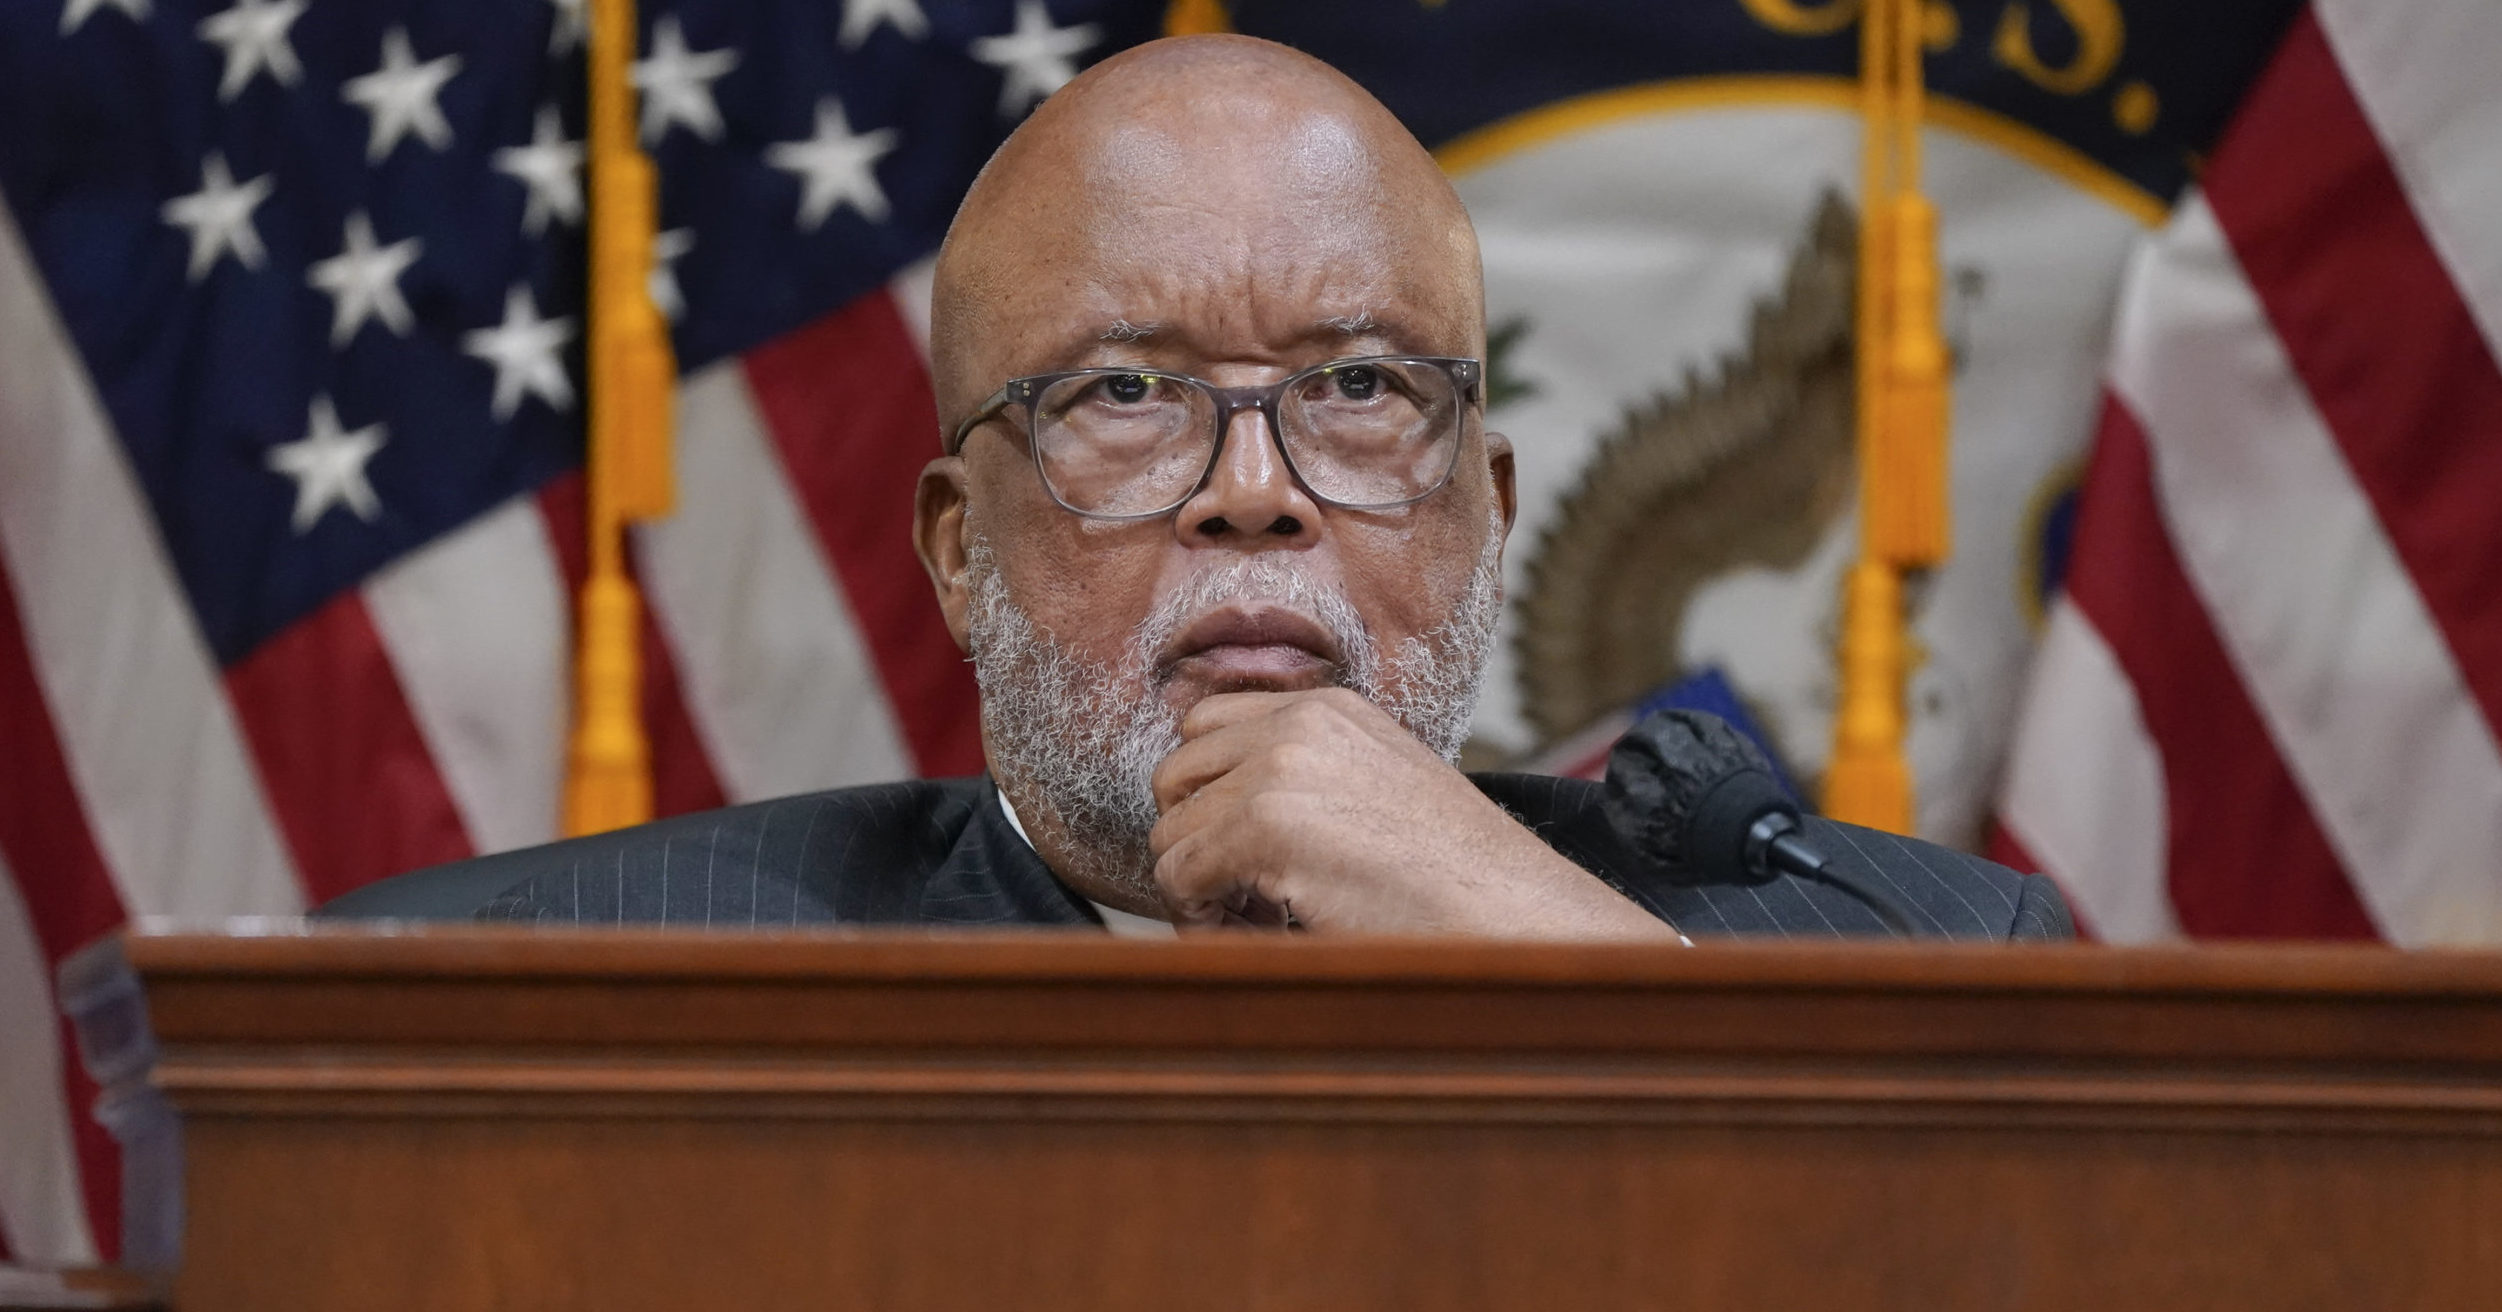 Chairman Bennie Thompson listens as the House select committee investigating the Jan. 6, 2021, Capitol incursion holds a hearing at the Capitol in Washington on July 12.